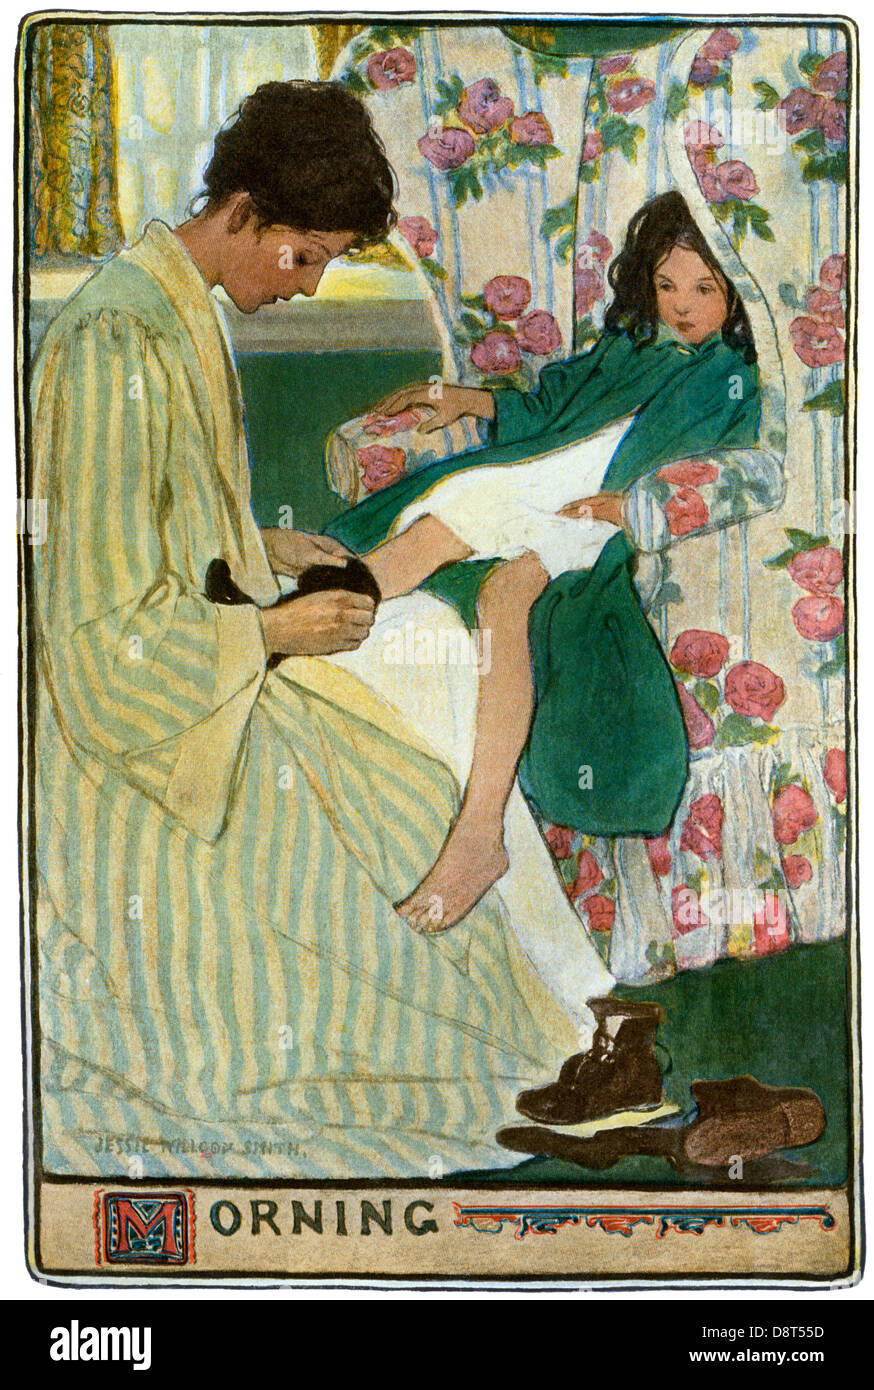 Mother putting on her daughter's socks and shoes, a morning ritual, early 1900s. Color halftone of a Jessie Willcox Smith Illustration Stock Photo